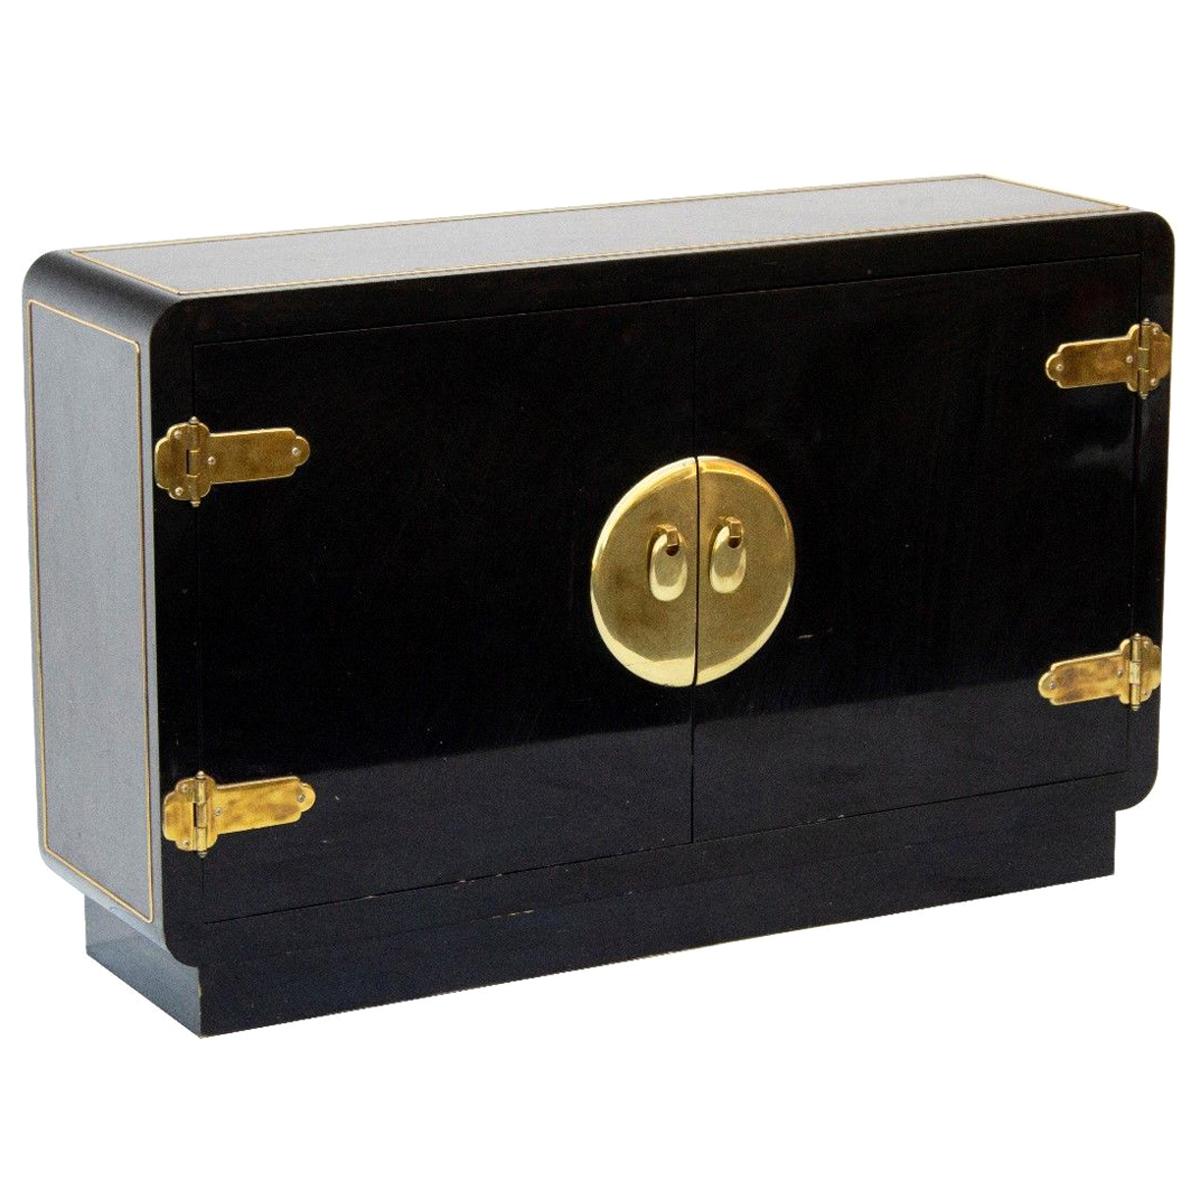 20th Century Asian Inspired Black Lacquered Cabinet by Mastercraft